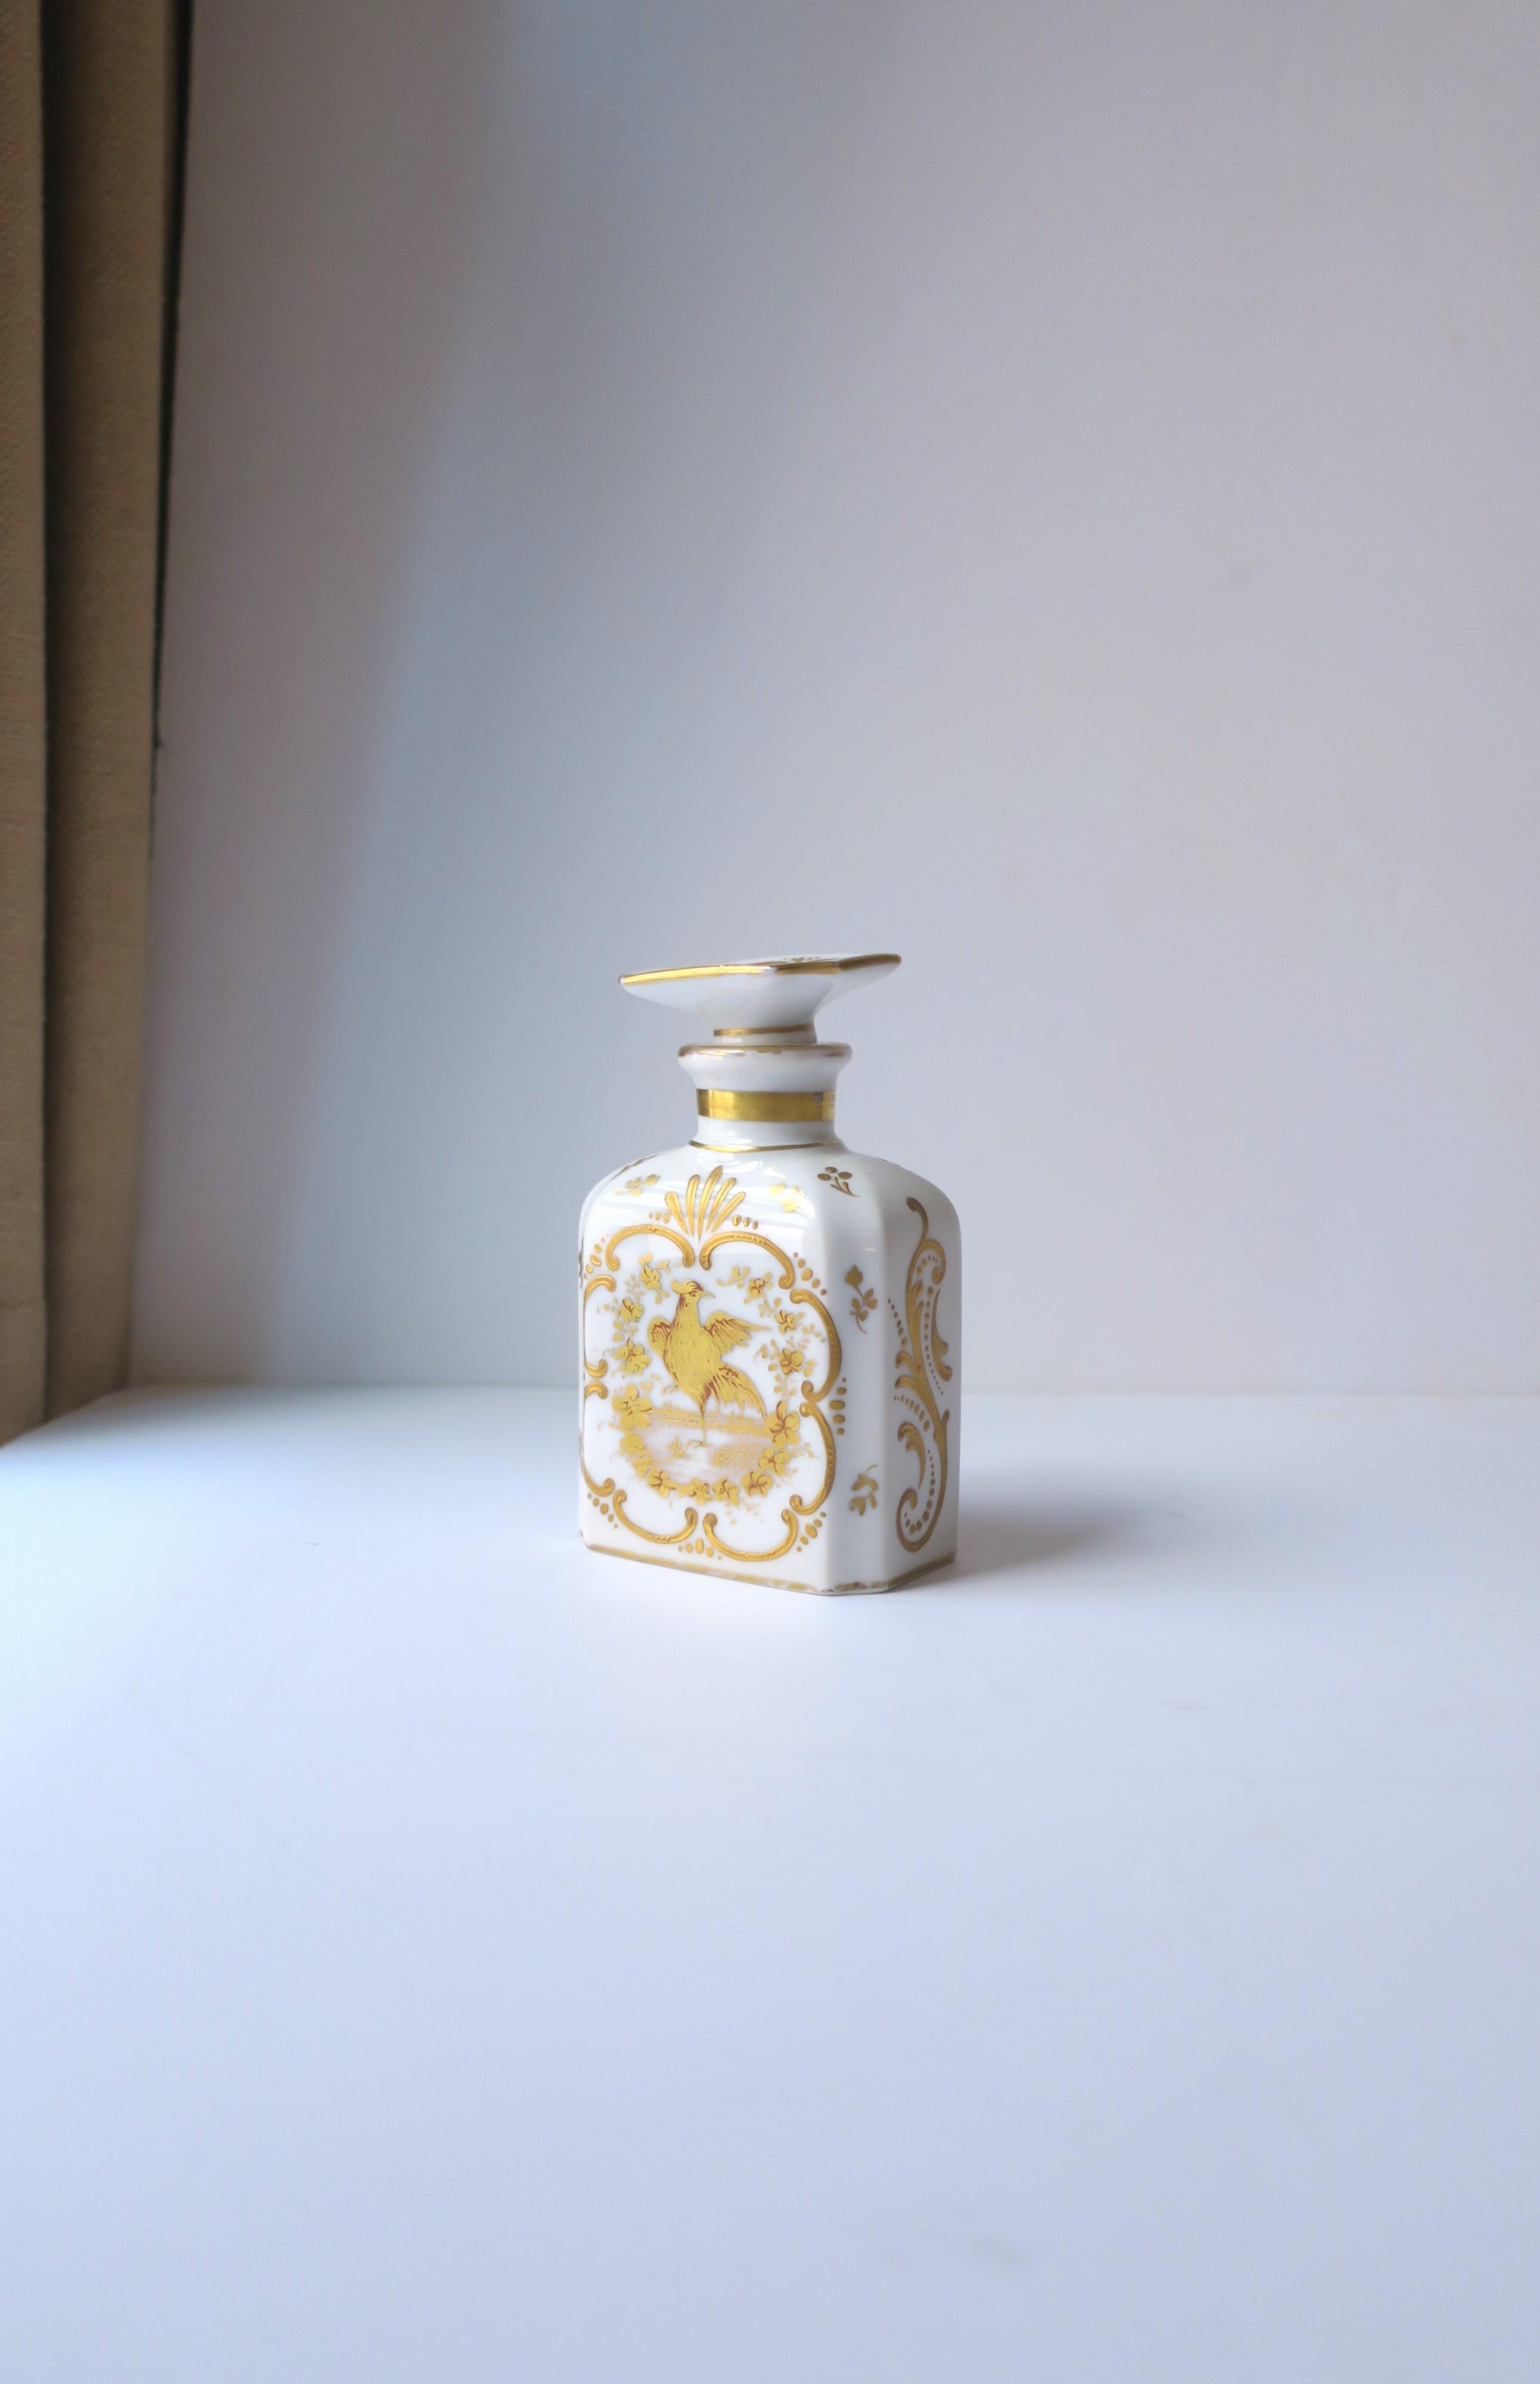 Italian White and Gold Porcelain Vanity Bottle with Bird Design Rococo Style For Sale 2